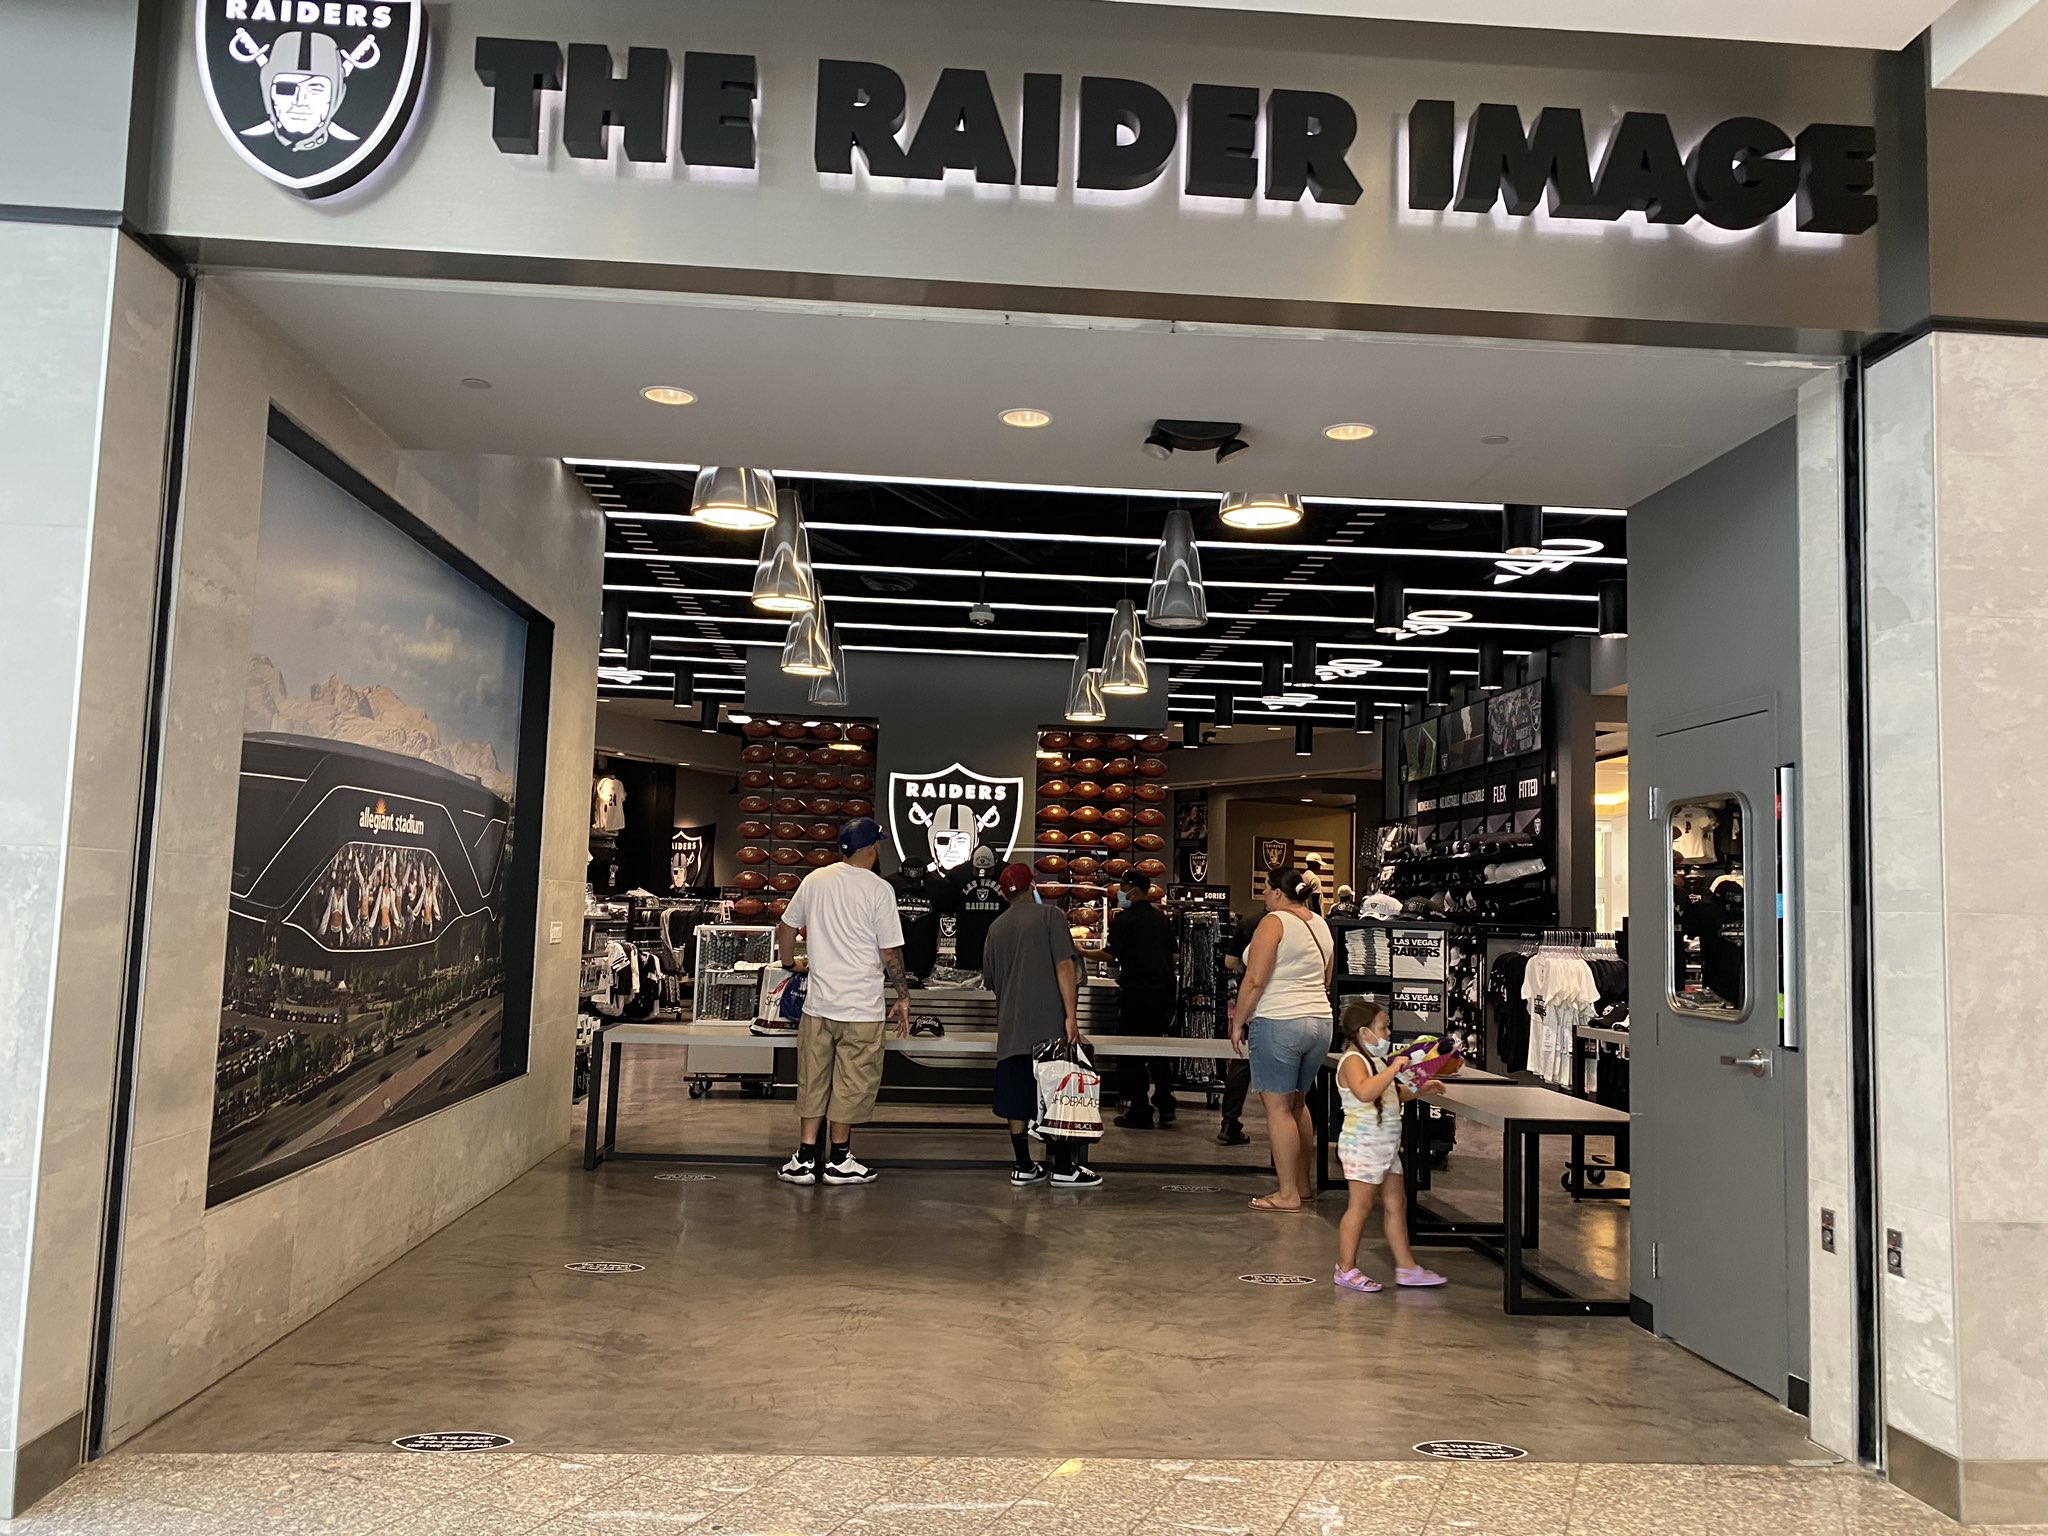 Mick Akers on X: 'A new Raider Image retail store opened at the  @MiracleMileLV in @PHVegas. Once the flagship store at @AllegiantStadm and  the location at the @Raiders HQ open there will